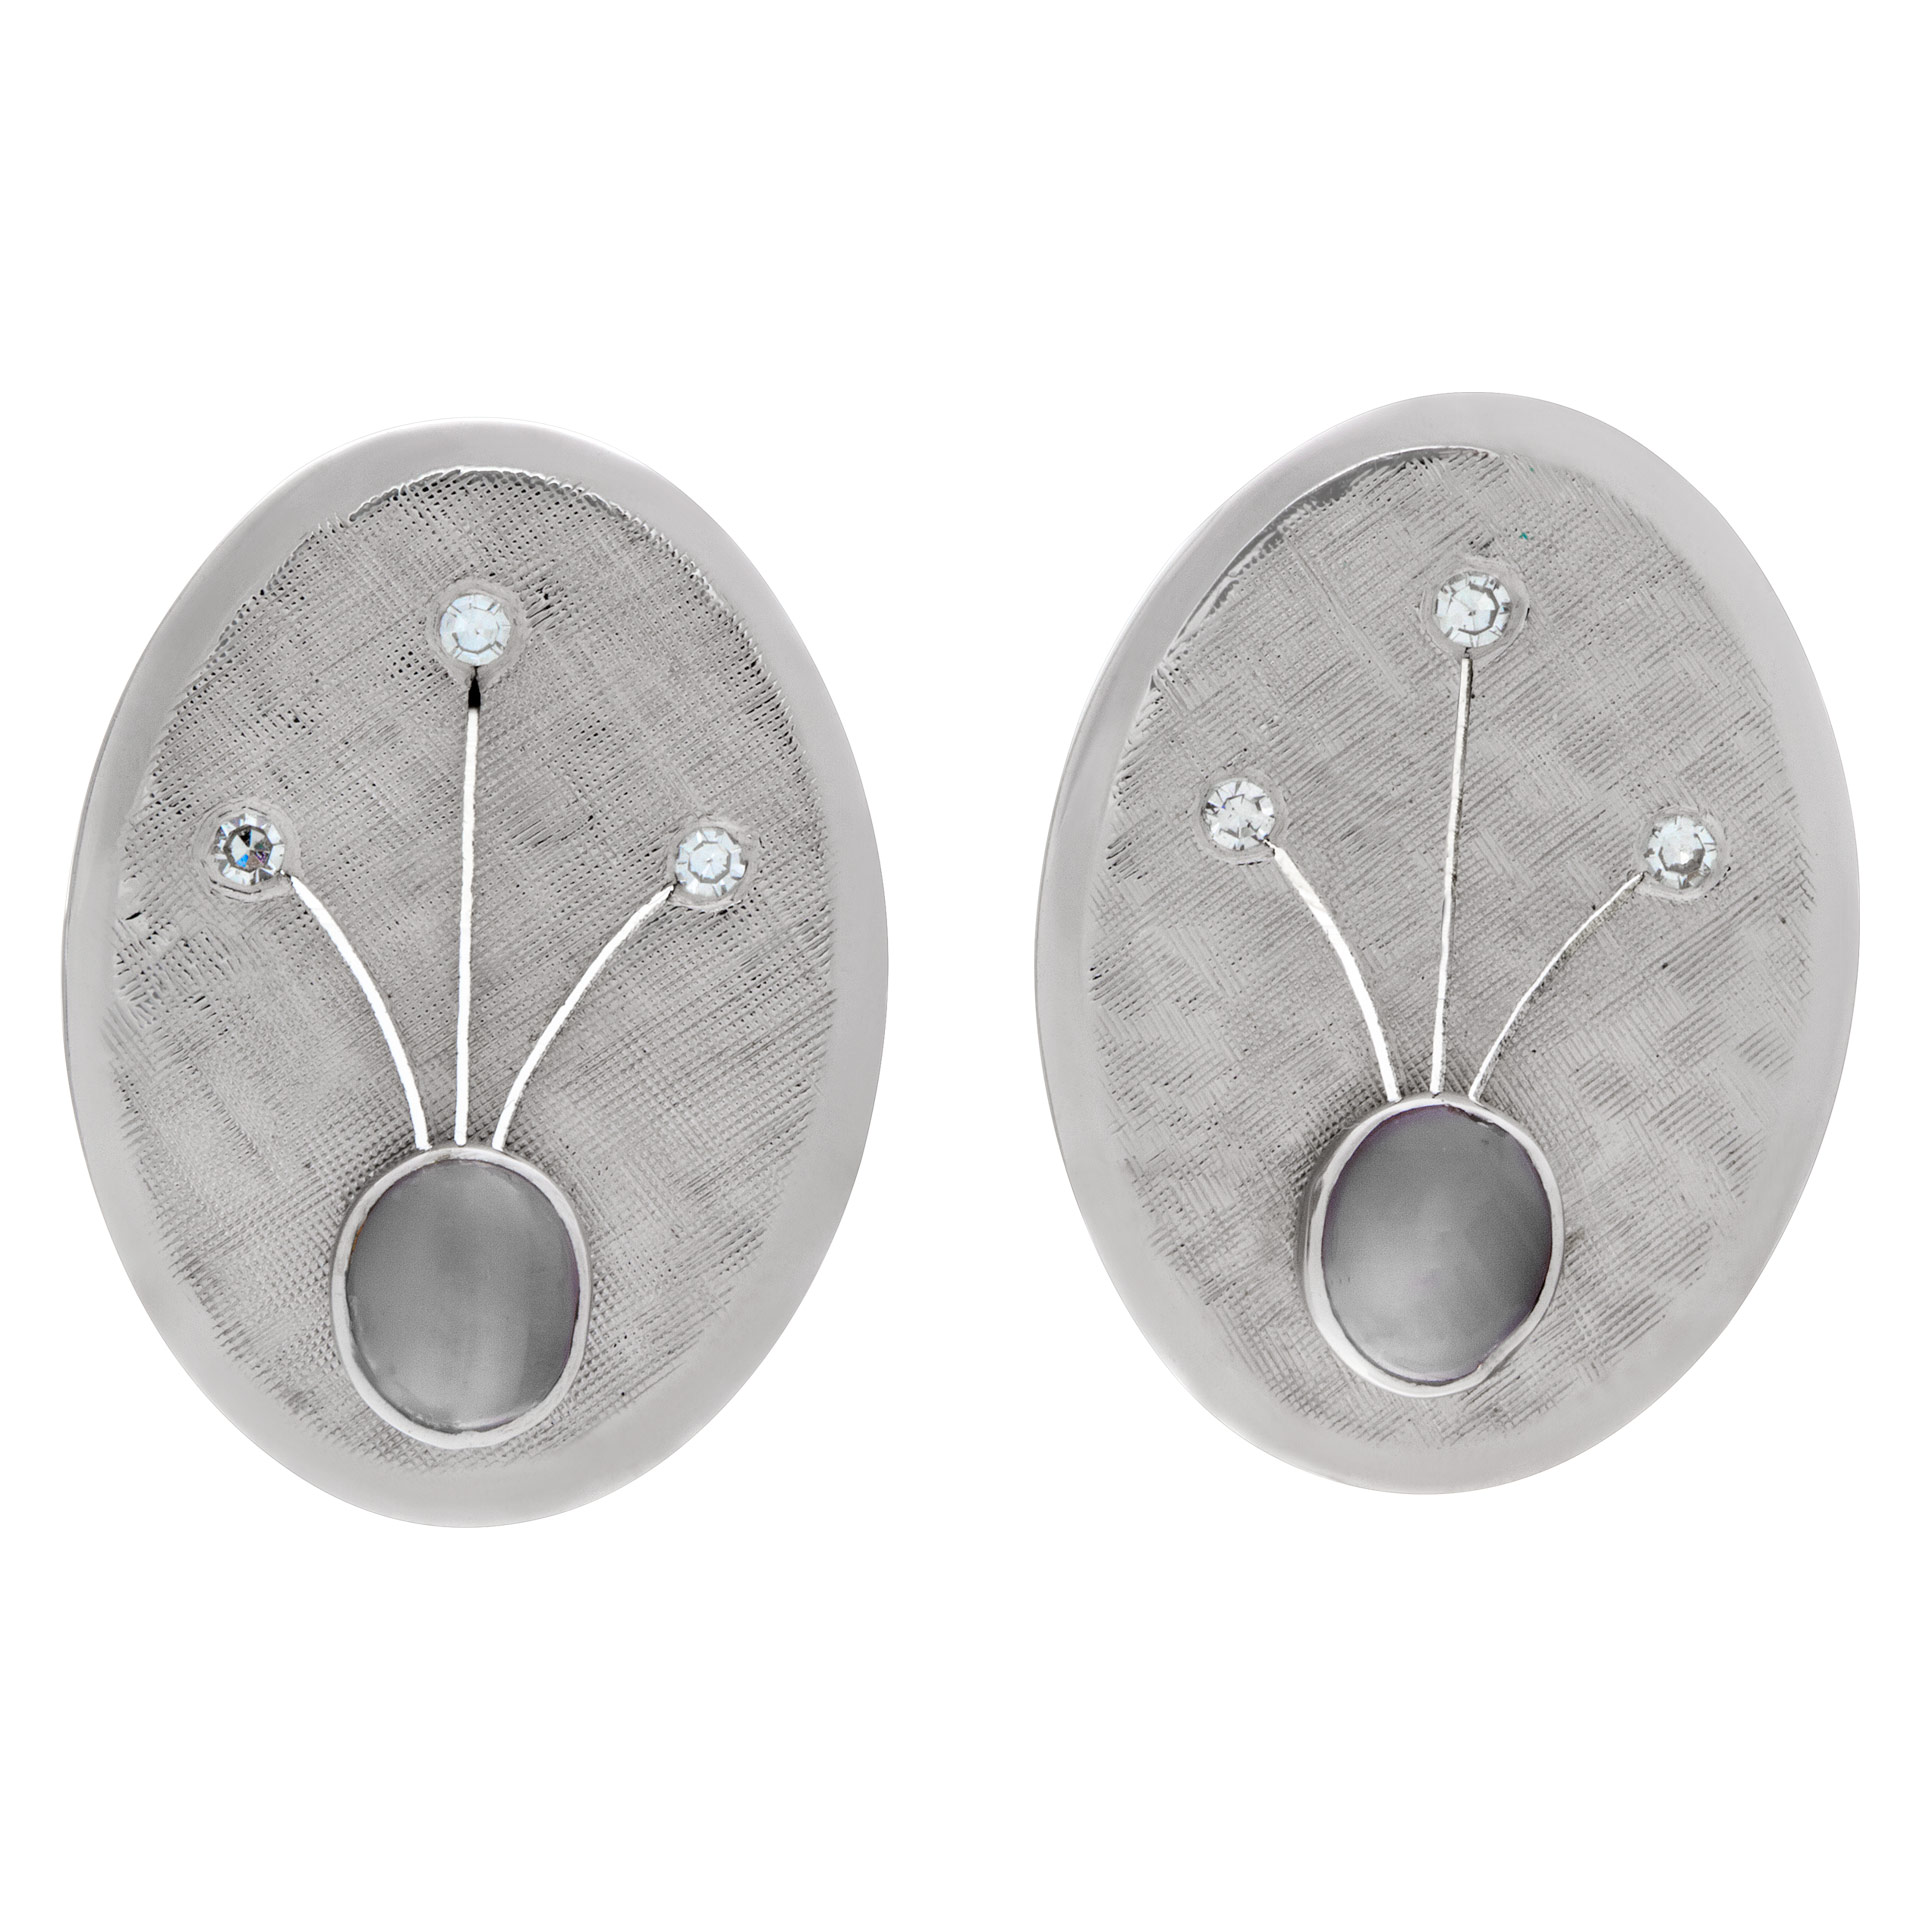 Oval earrings with star sapphire and diamond accents in 14k white gold image 1